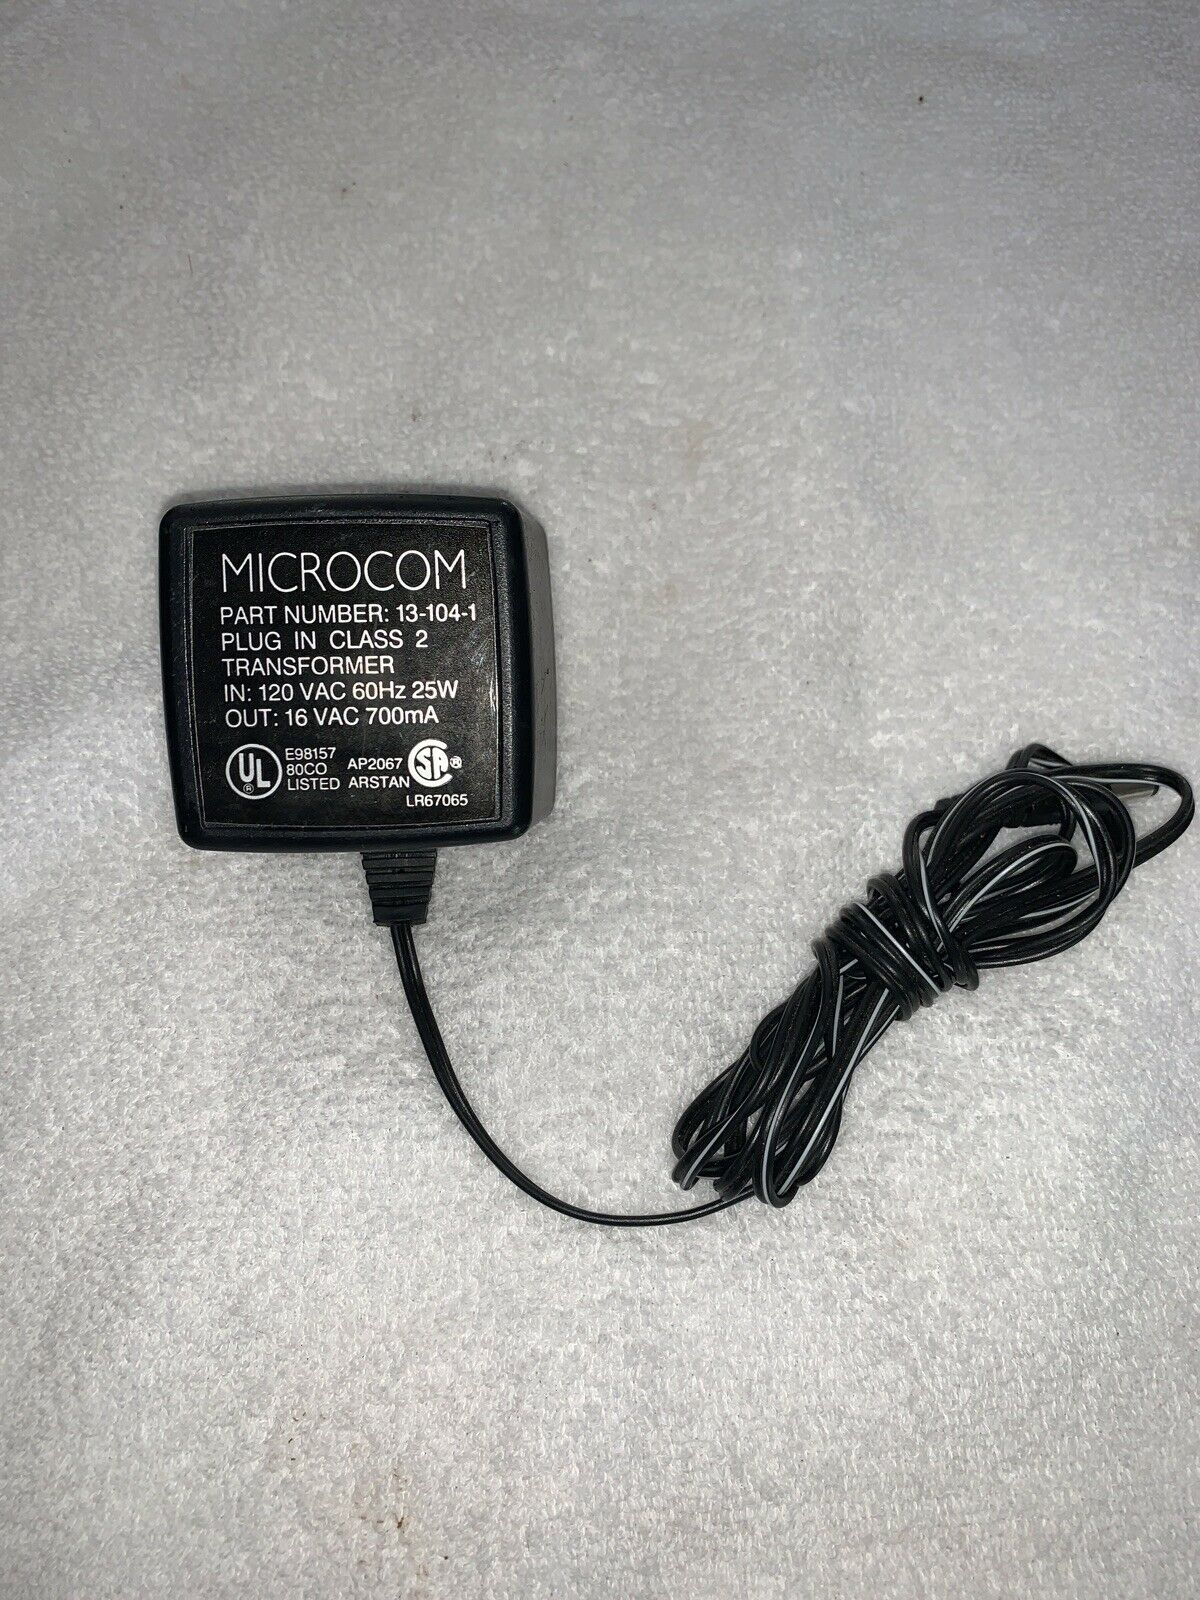 Microcom 13-104-1 Plug-In Class 2 Transformer AC Adapter Output 19V AC 600mA Connection Split/Duplication: 1:3 Type: